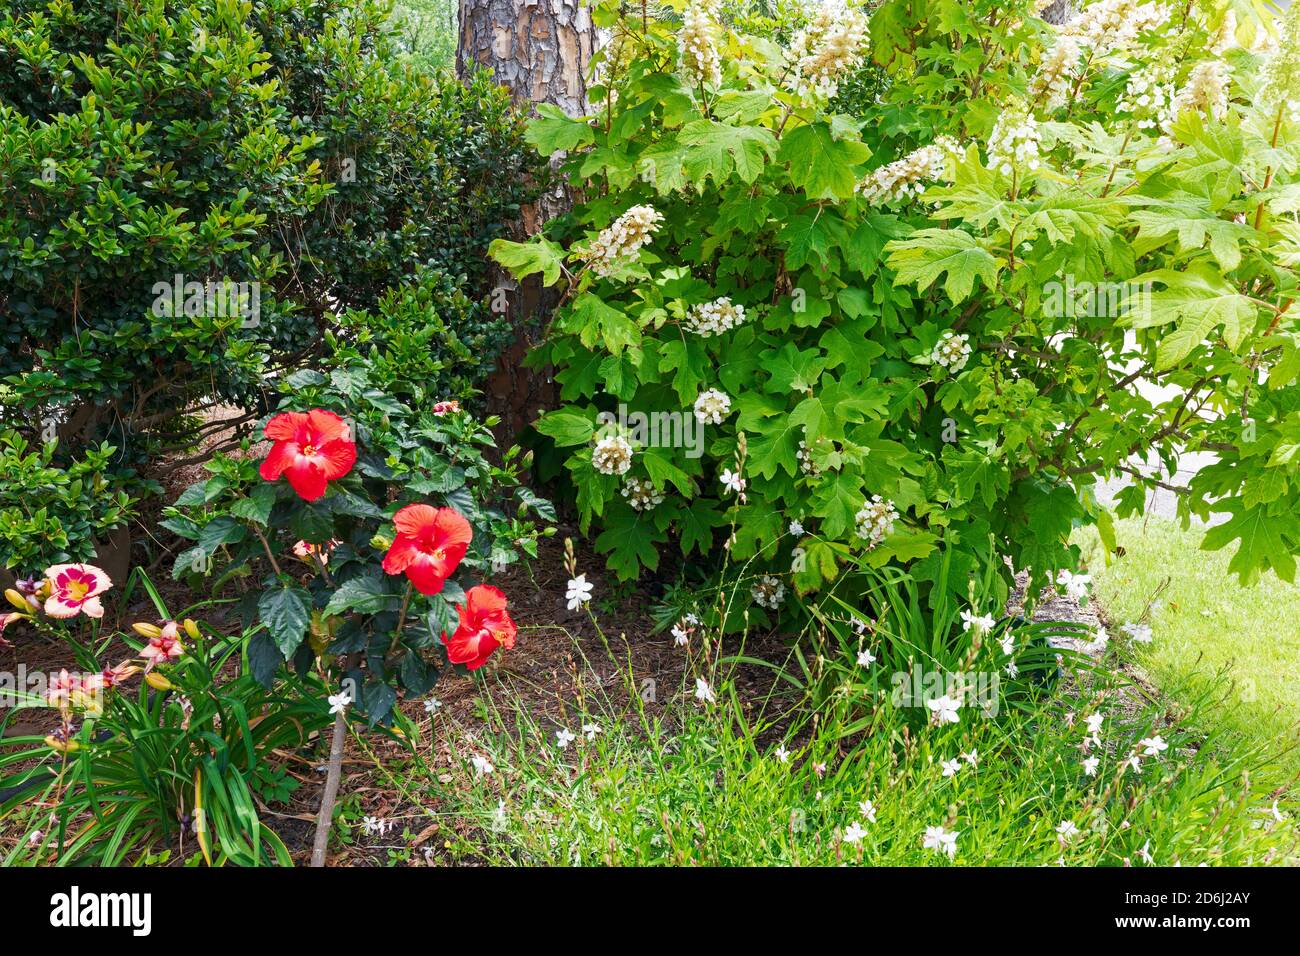 A South Carolina garden in May. Oak leaf hydrangea, gaura, daylilies and hibiscus in a colourful border. Stock Photo